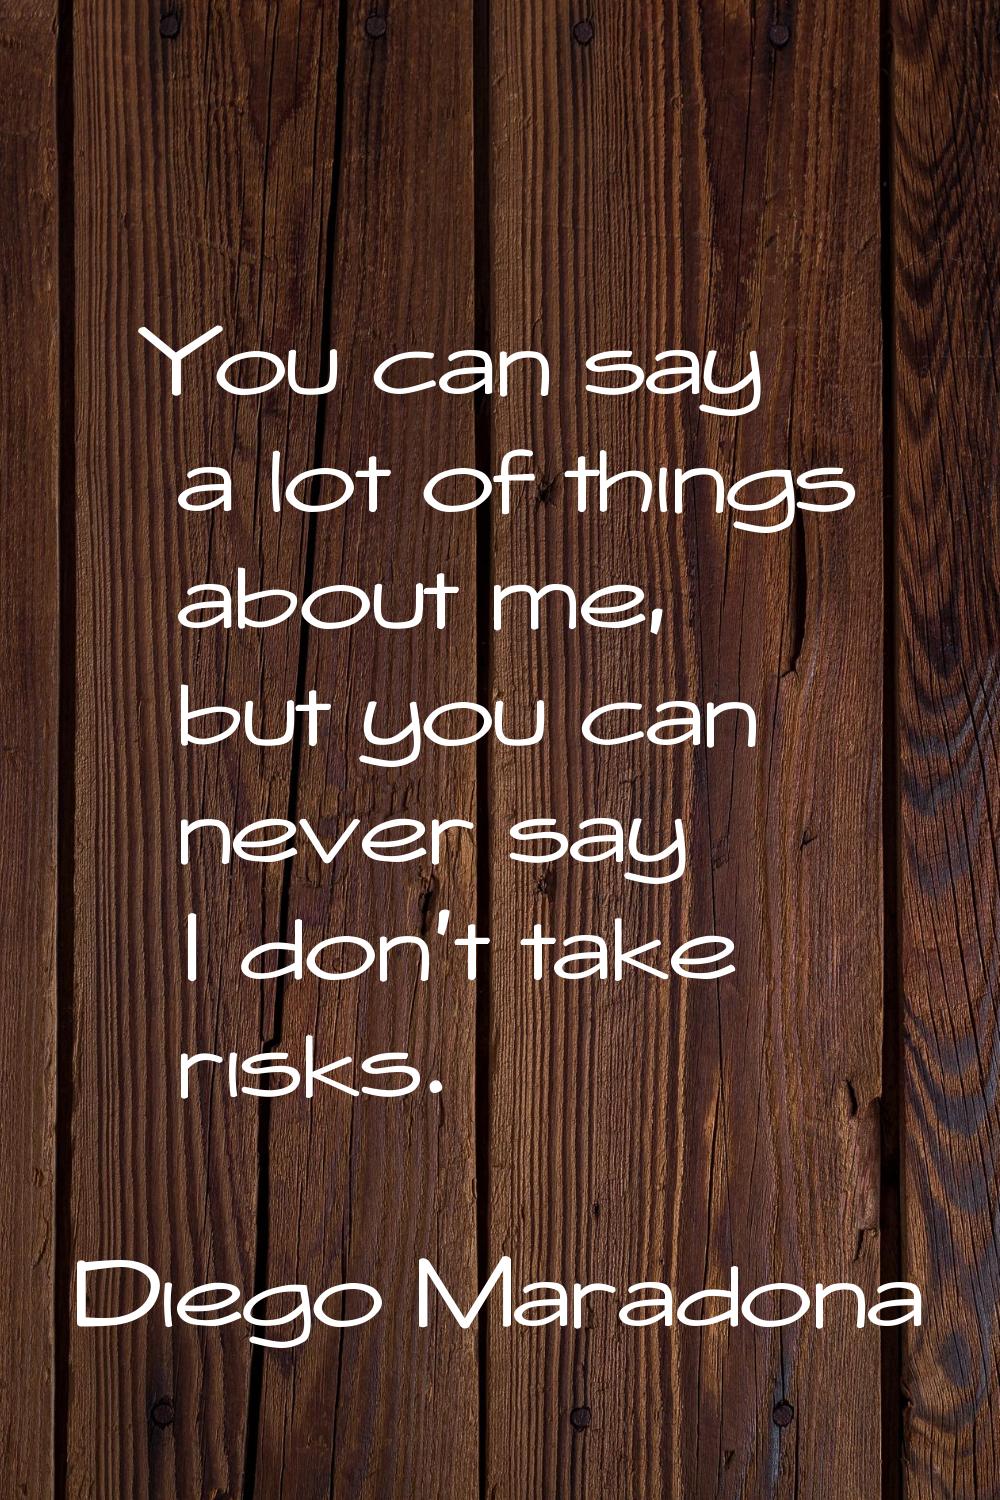 You can say a lot of things about me, but you can never say I don't take risks.